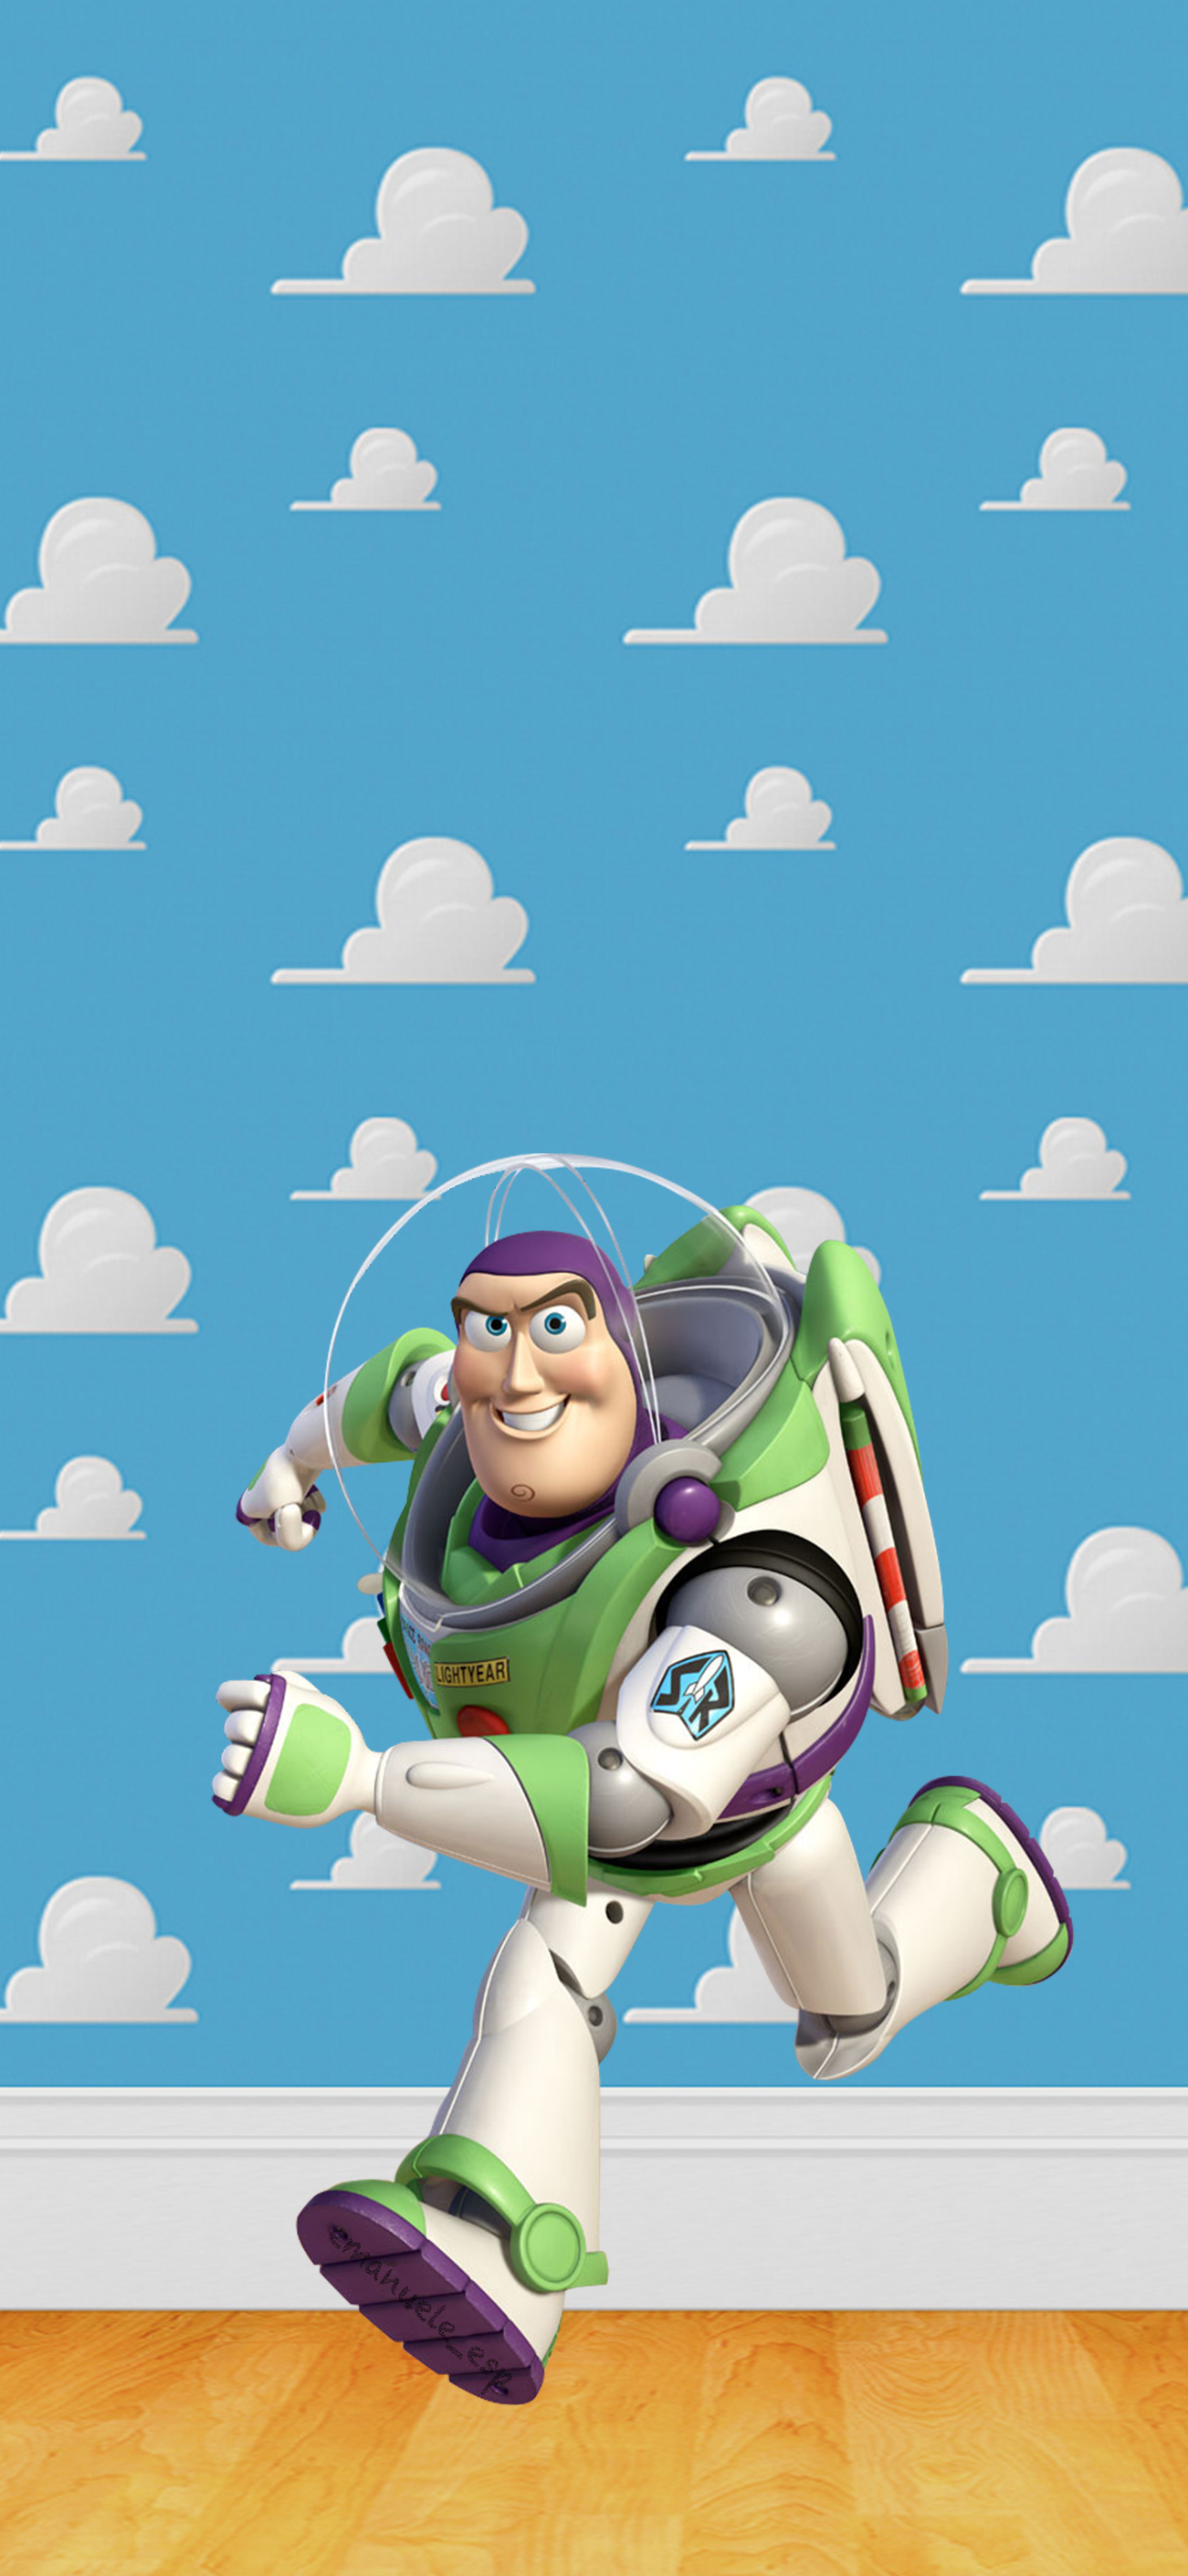 Toy Story Iphone Wallpaper Iphone Wallpaper